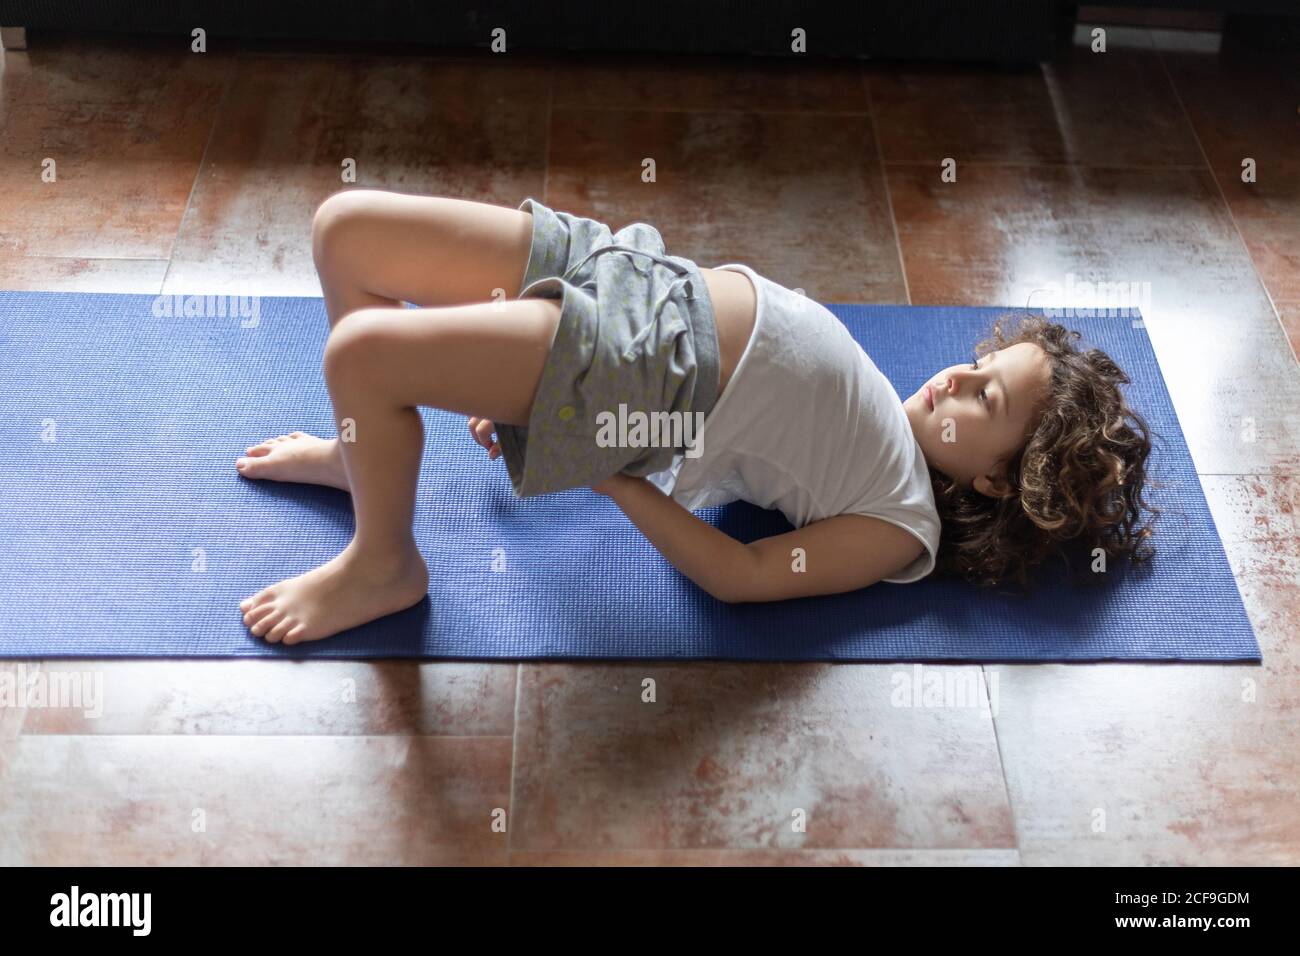 https://c8.alamy.com/comp/2CF9GDM/from-above-side-view-of-little-girl-in-casual-sportswear-performing-bridge-pose-on-mat-while-practicing-yoga-at-home-2CF9GDM.jpg